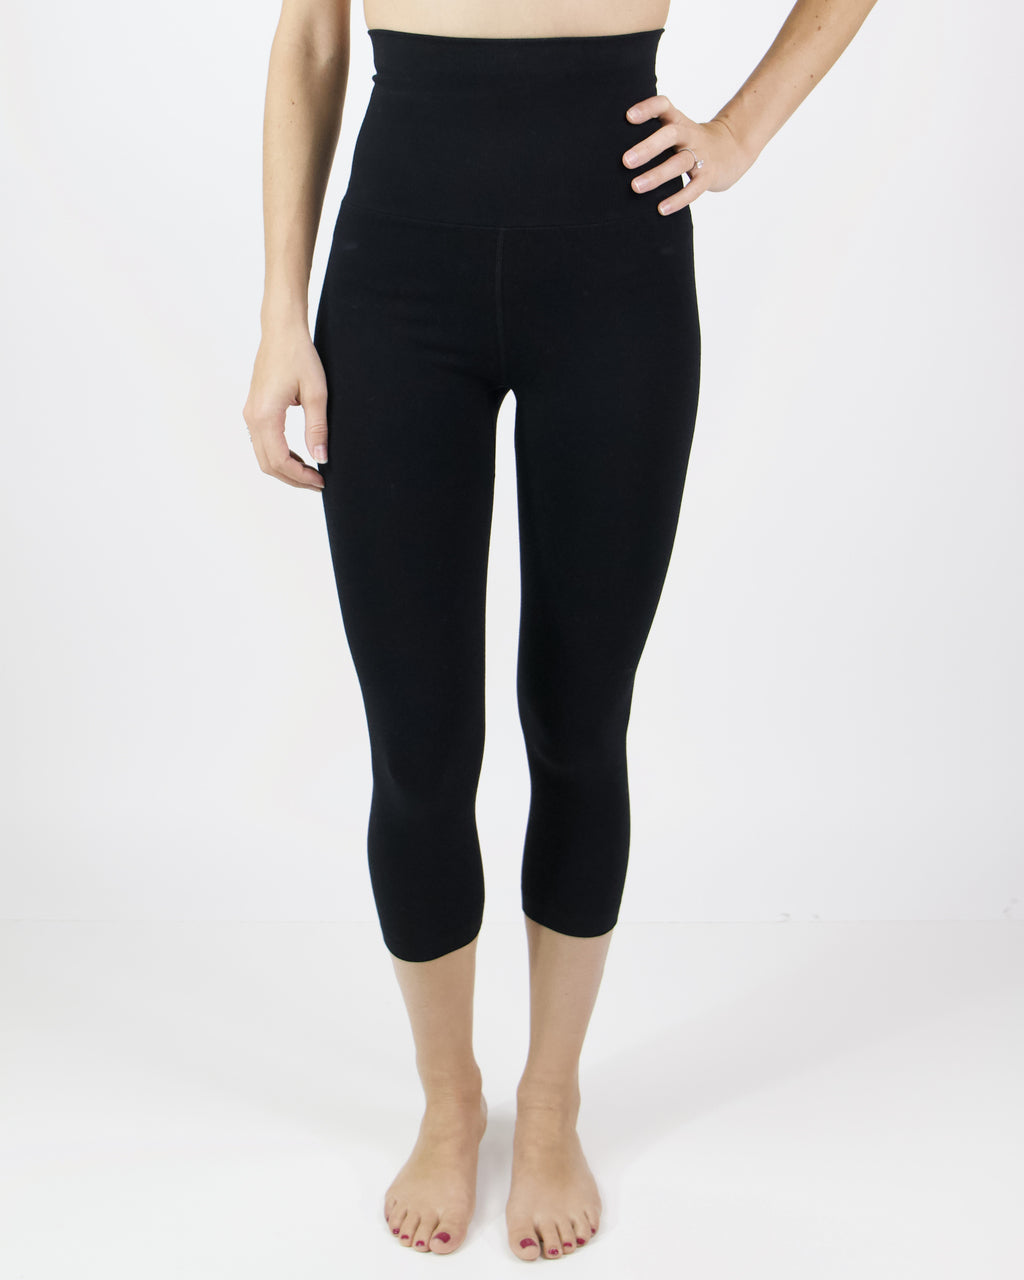 Grace & Lace Perfect Fit Capris - Babe Outfitters